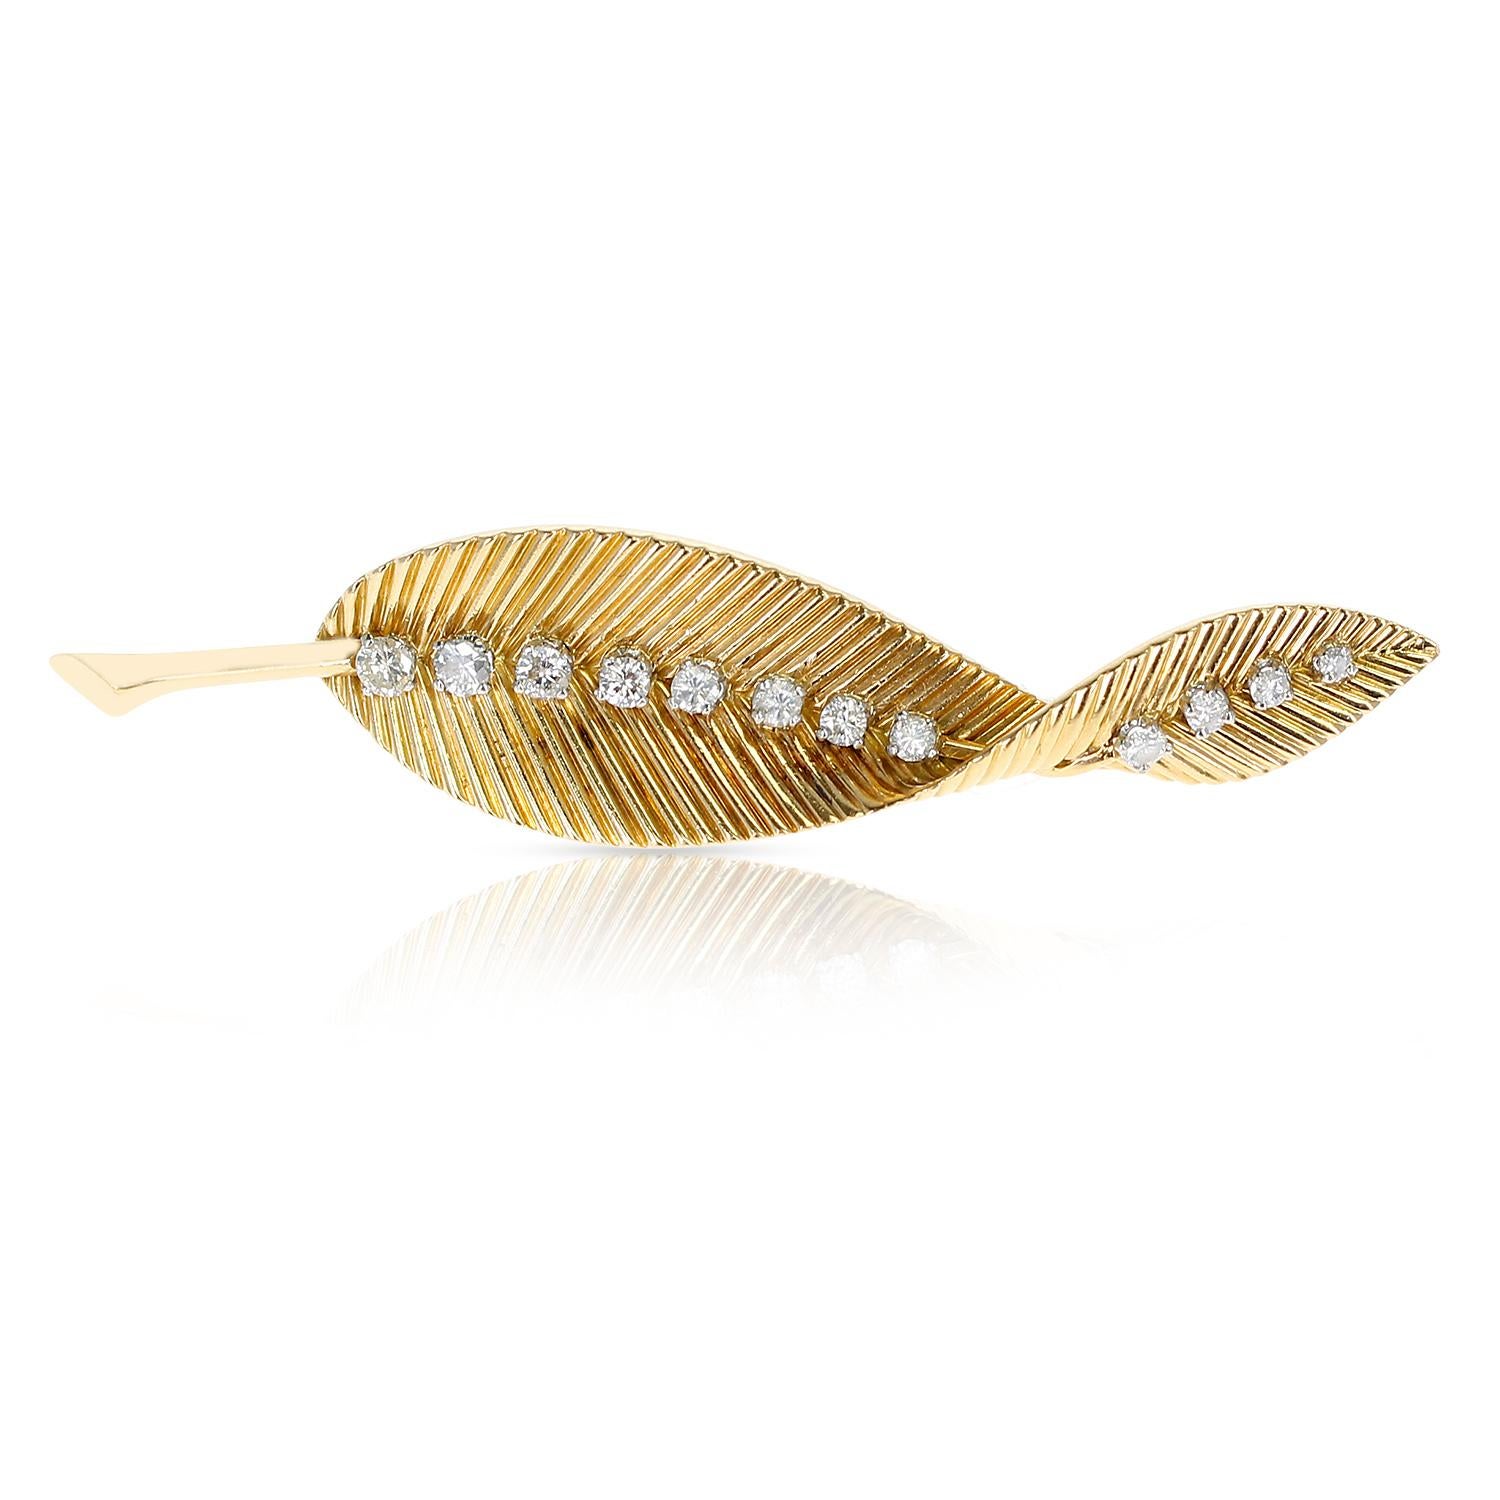 A French Van Cleef & Arpels Leaf Brooch Pin with 12 Round Diamonds made in 18 Karat Yellow Gold. The length is 3 Inches of the brooch. The total weight is 12.23 grams. Stamped MADE IN FRANCE. 
 